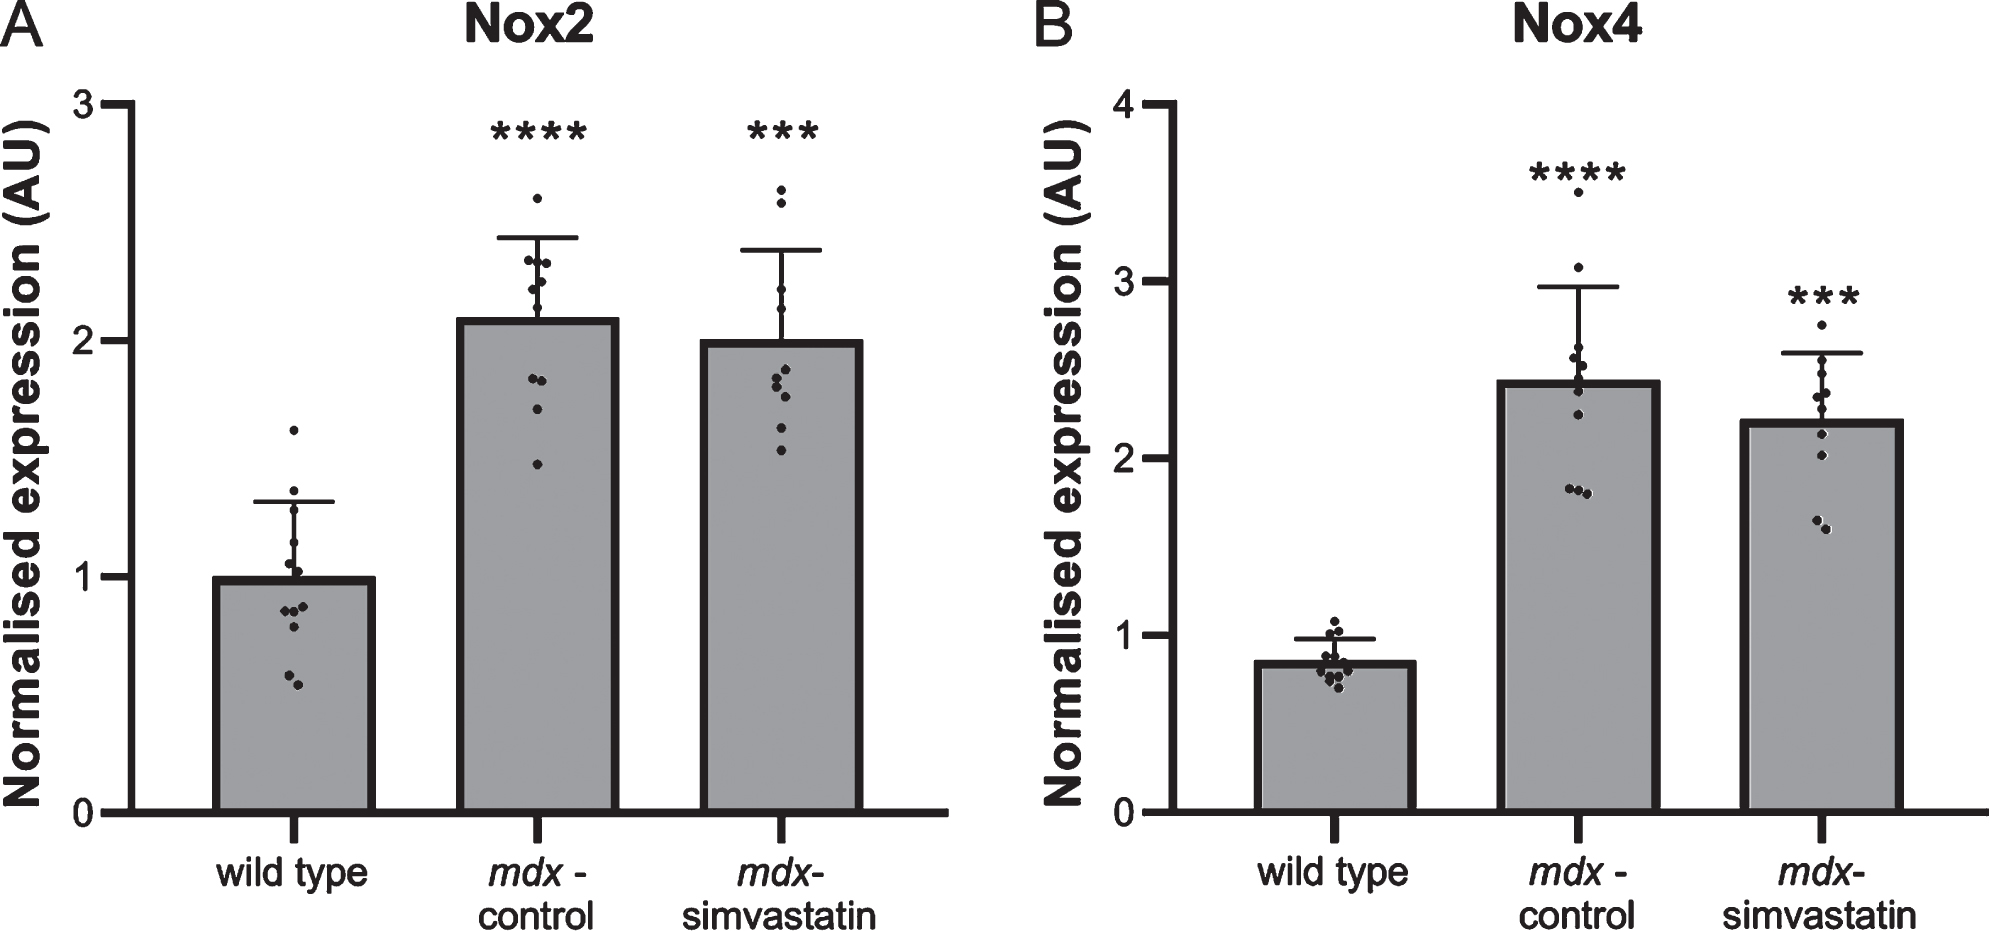 Oxidative stress. Expression of (A) Nox2 and (B) Nox4 in the diaphragm of 24–week old mice after 12 weeks of simvastatin treatment (n = 10–12). ***p < 0.001, ****p < 0.0001 compared to wild type mice.